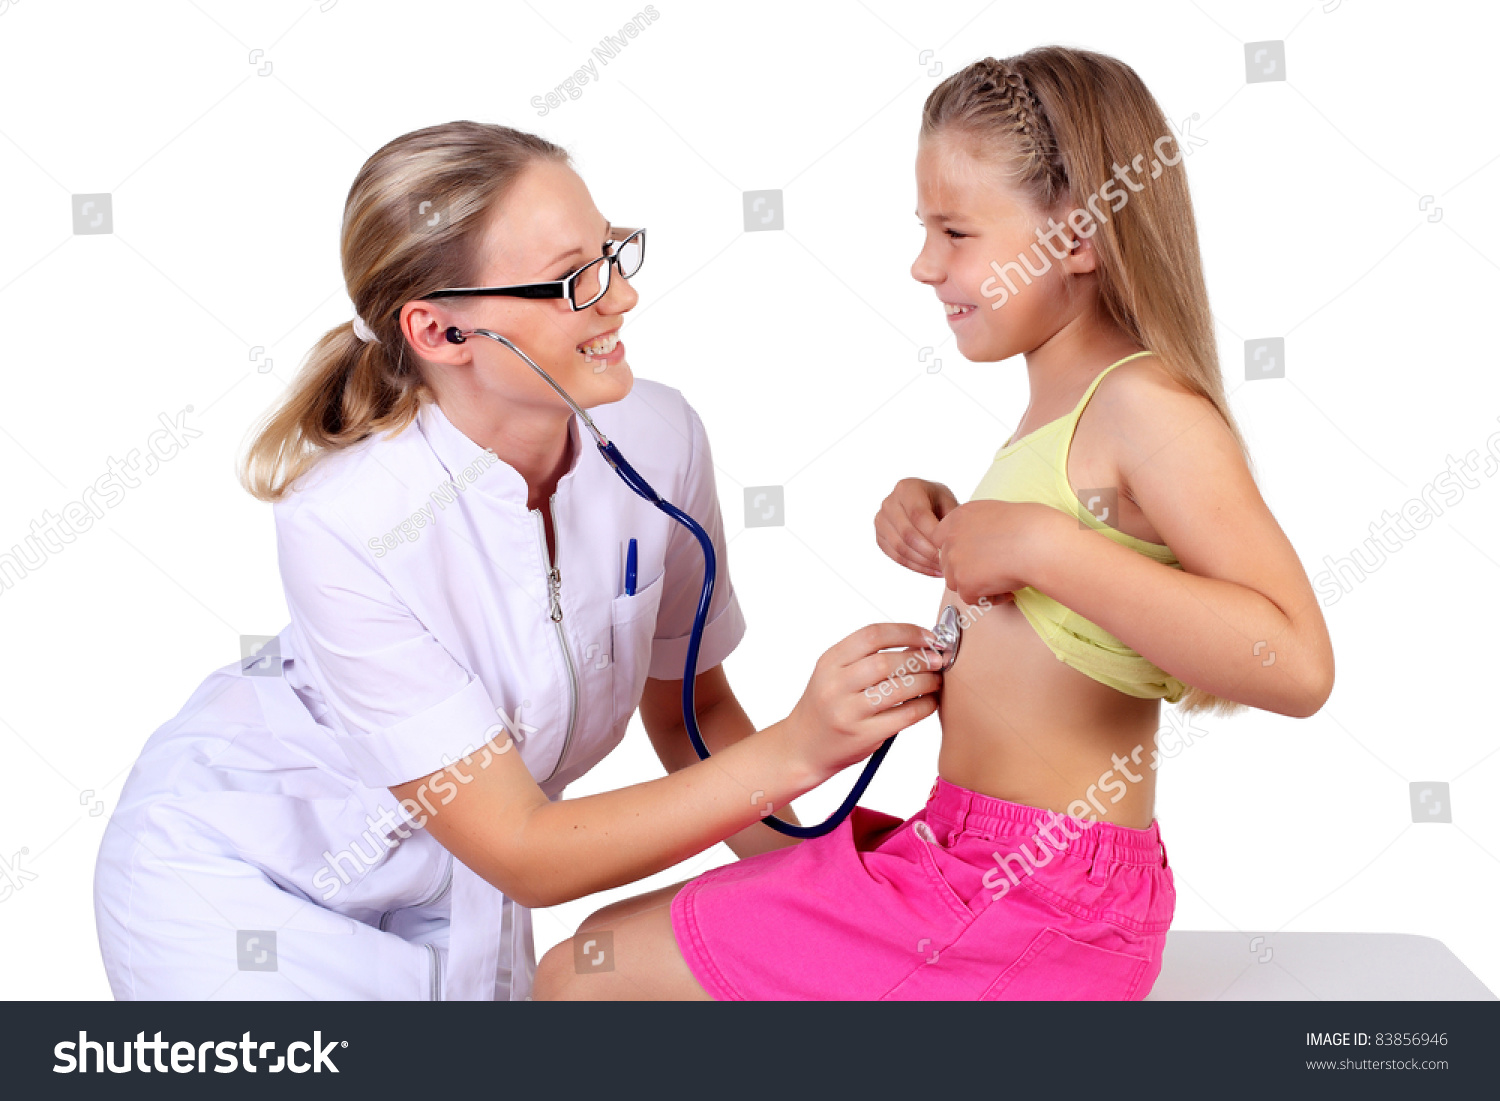 Young Female Doctor Doing Medical Examination Stock Photo Edit Now 83856946